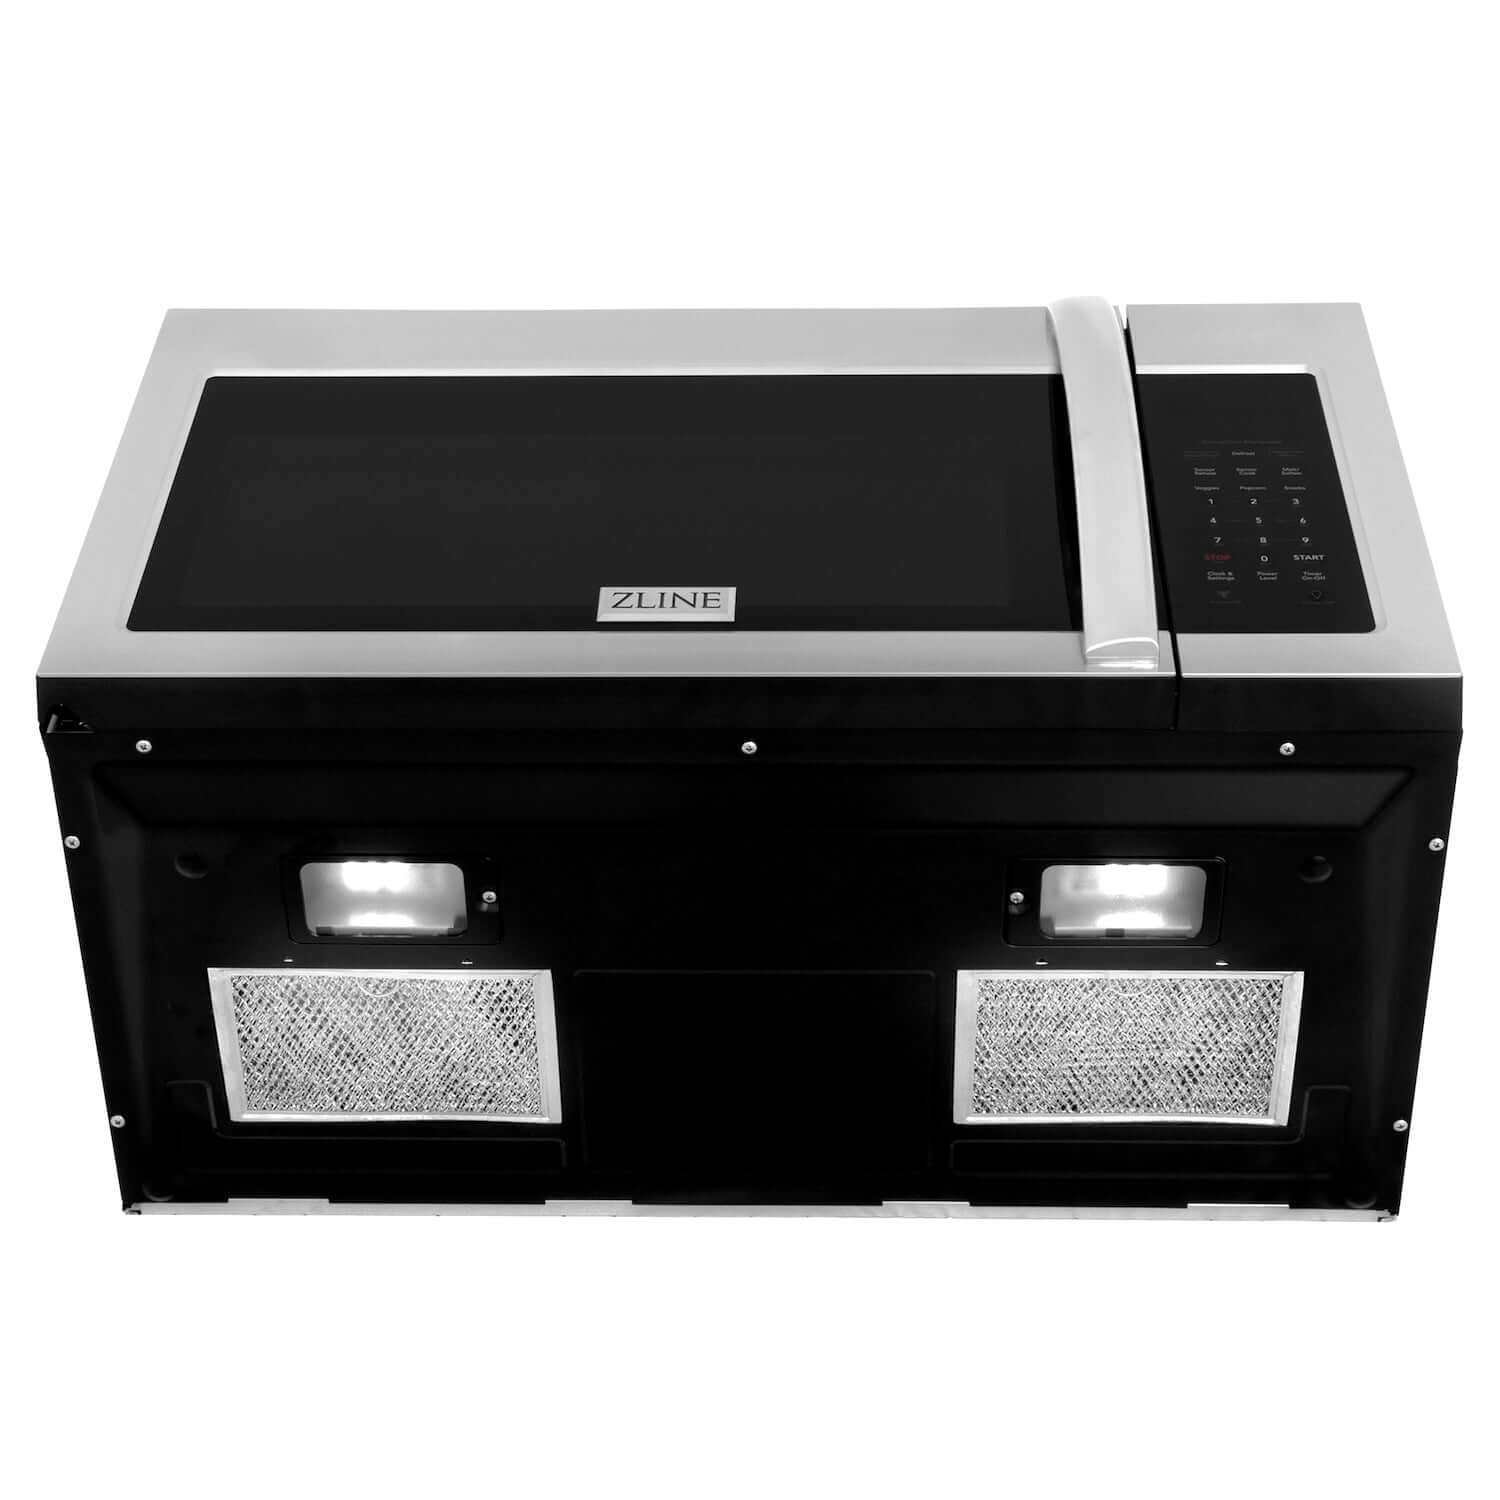 ZLINE 30" Over the Range Microwave under angle of lighting and ventilation.